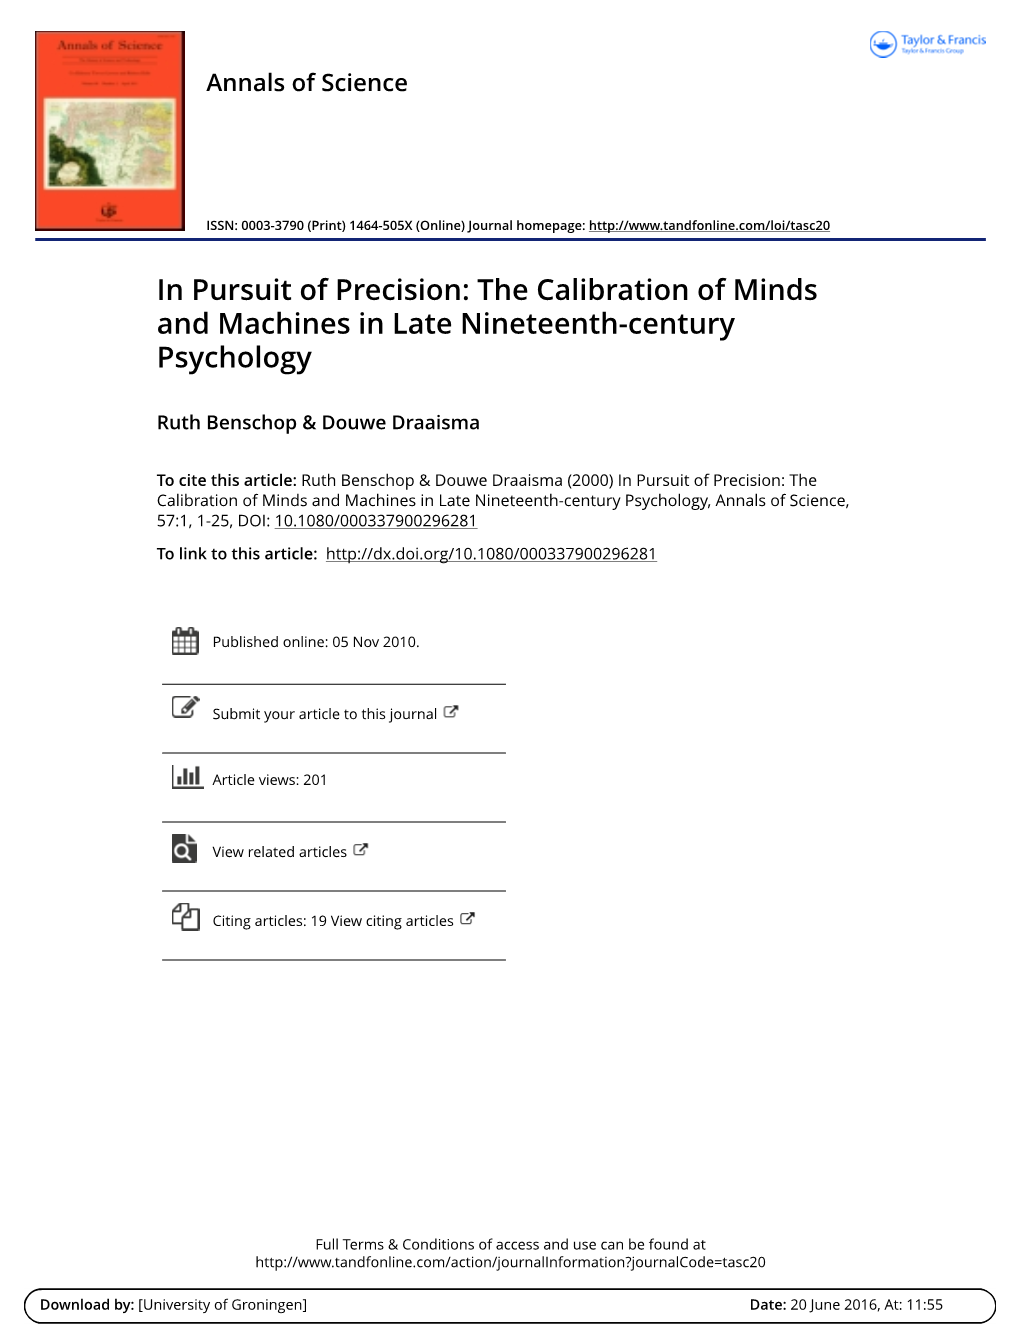 In Pursuit of Precision: the Calibration of Minds and Machines in Late Nineteenth-Century Psychology